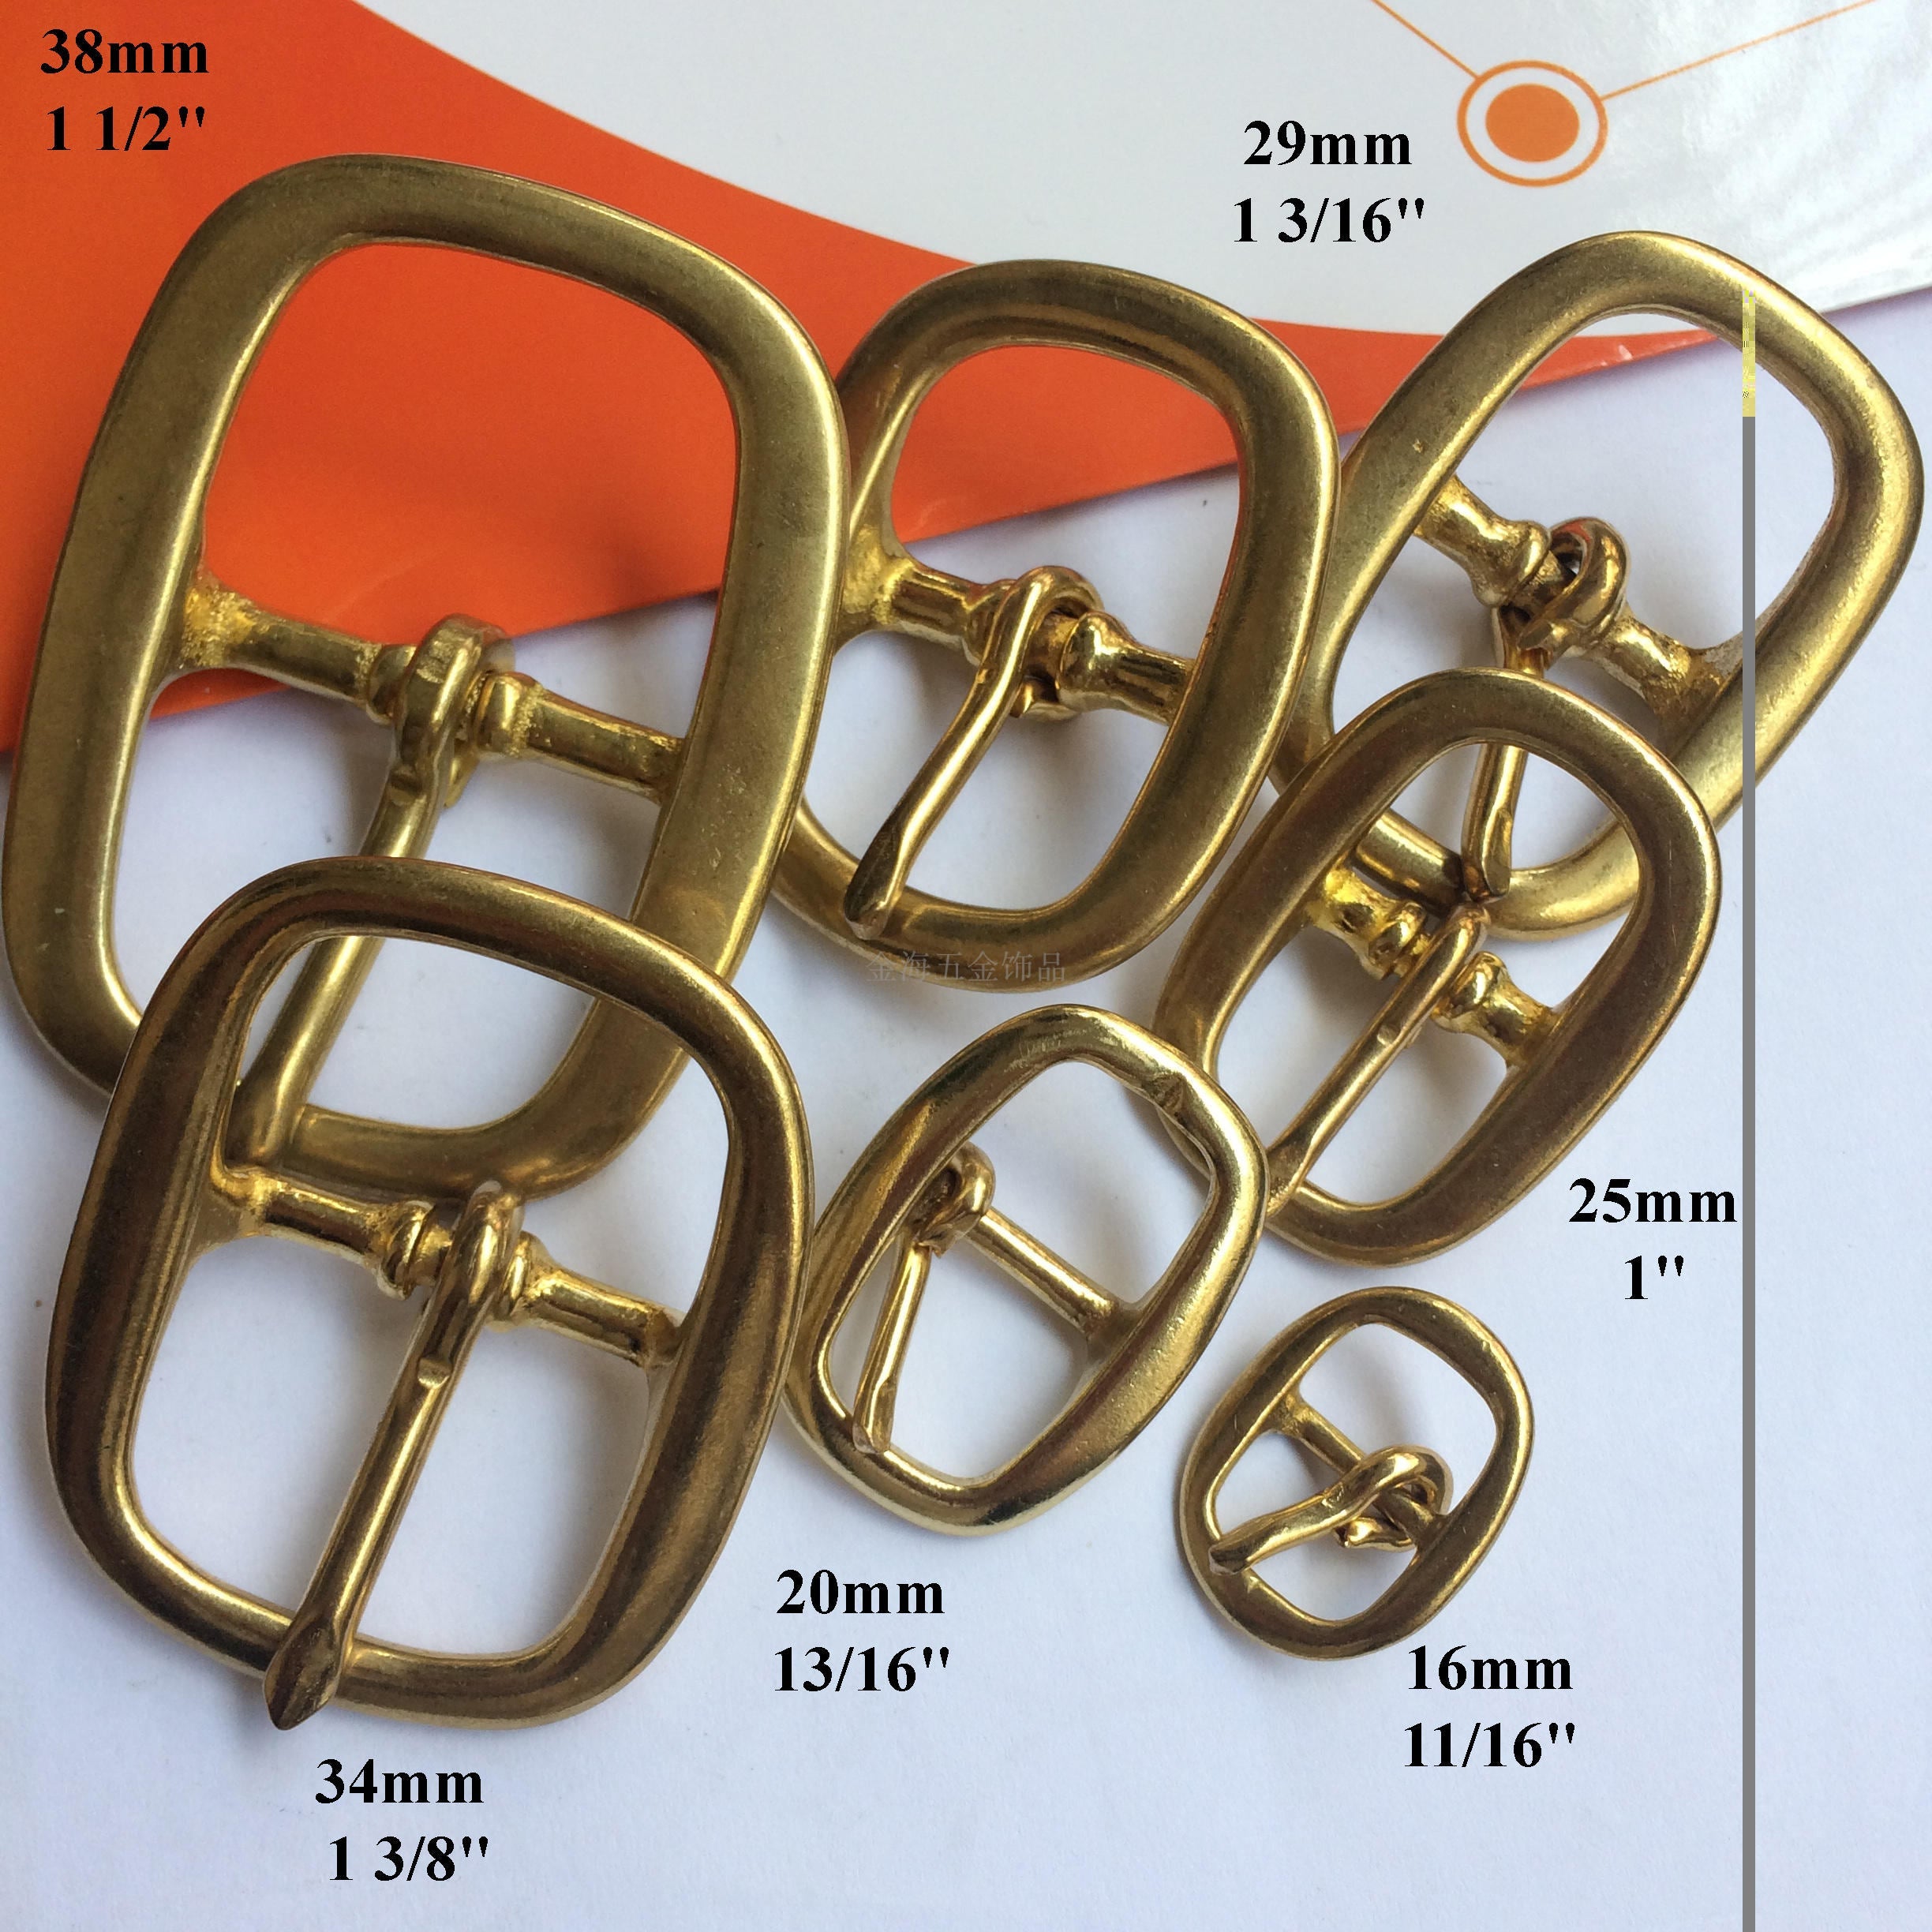 Solid Brass Oval Belt Buckle Center Bar Single Prong Pin Tongue Collar Halter Bridle Sandal Strap Shoes Leather Craft Repair 16 20 25 38 mm